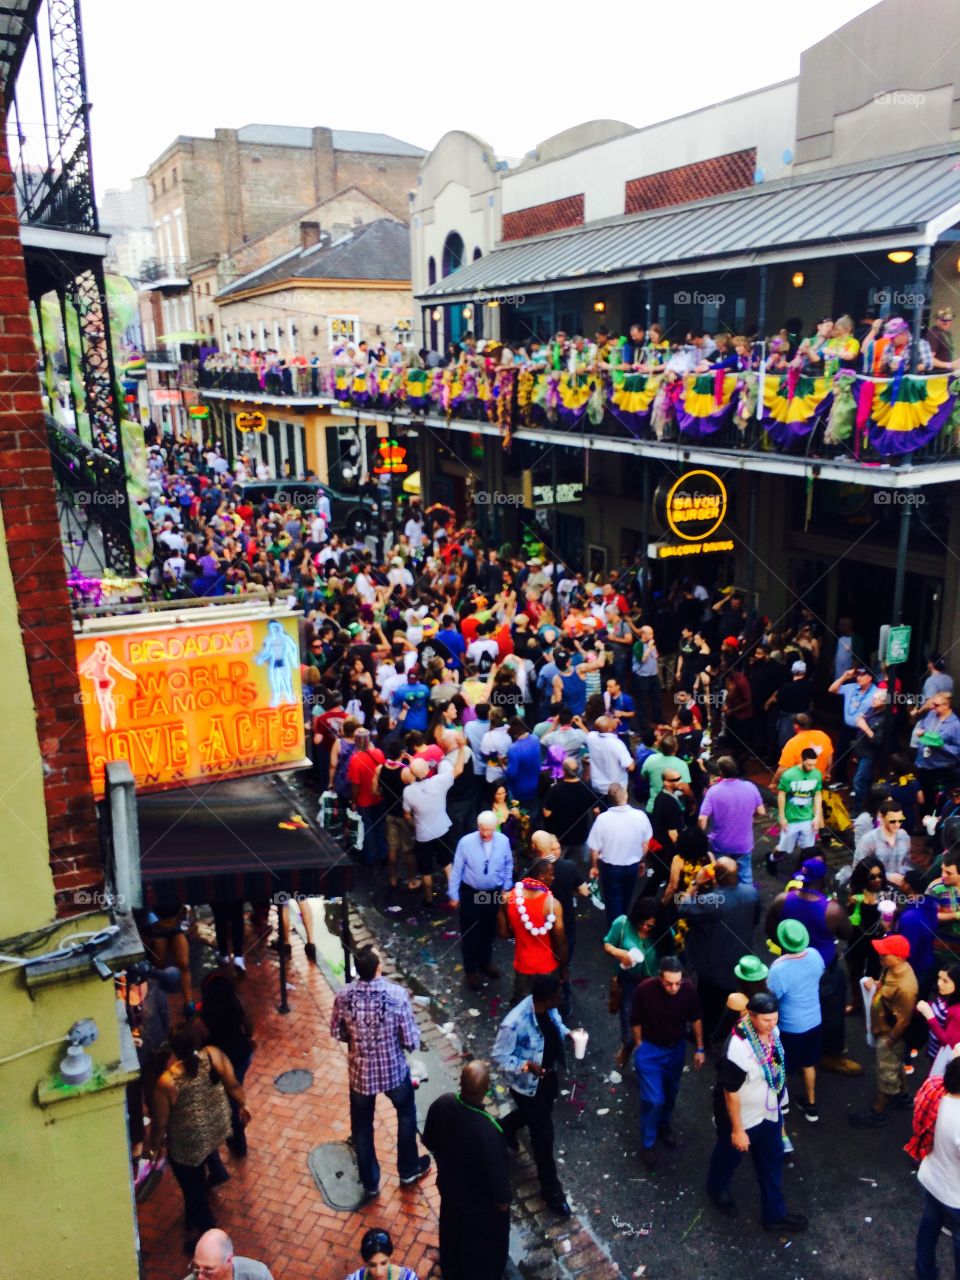 Mardi gras from above
